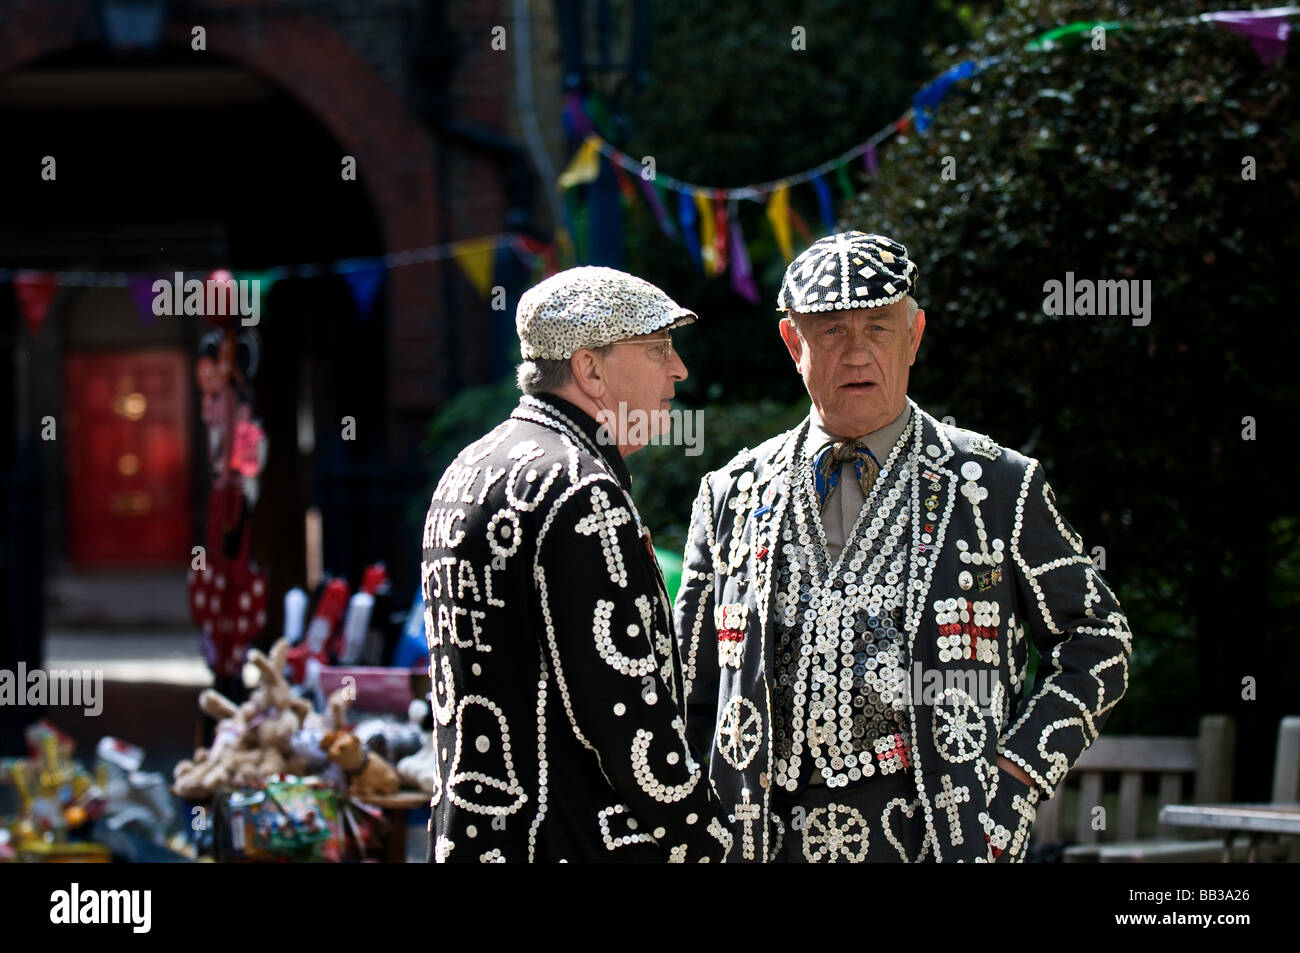 The Pearly King of Highgate talking to the Pearly King of Crystal Palace in London.  Photo by Gordon Scammell Stock Photo